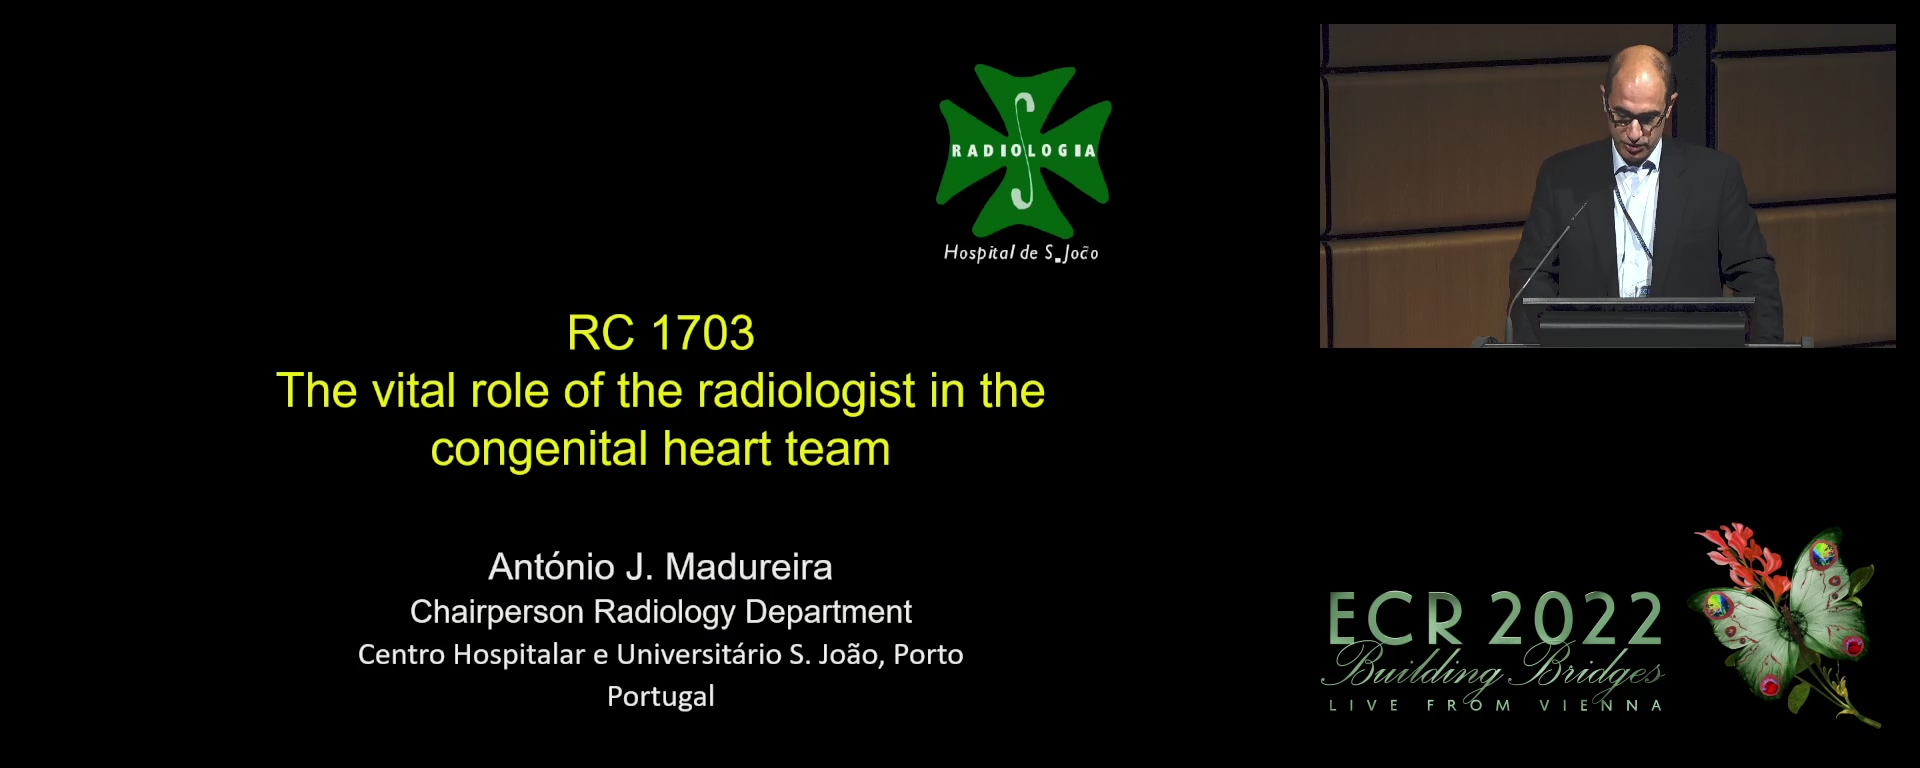 The vital role of the radiologist in the congenital cardiac team